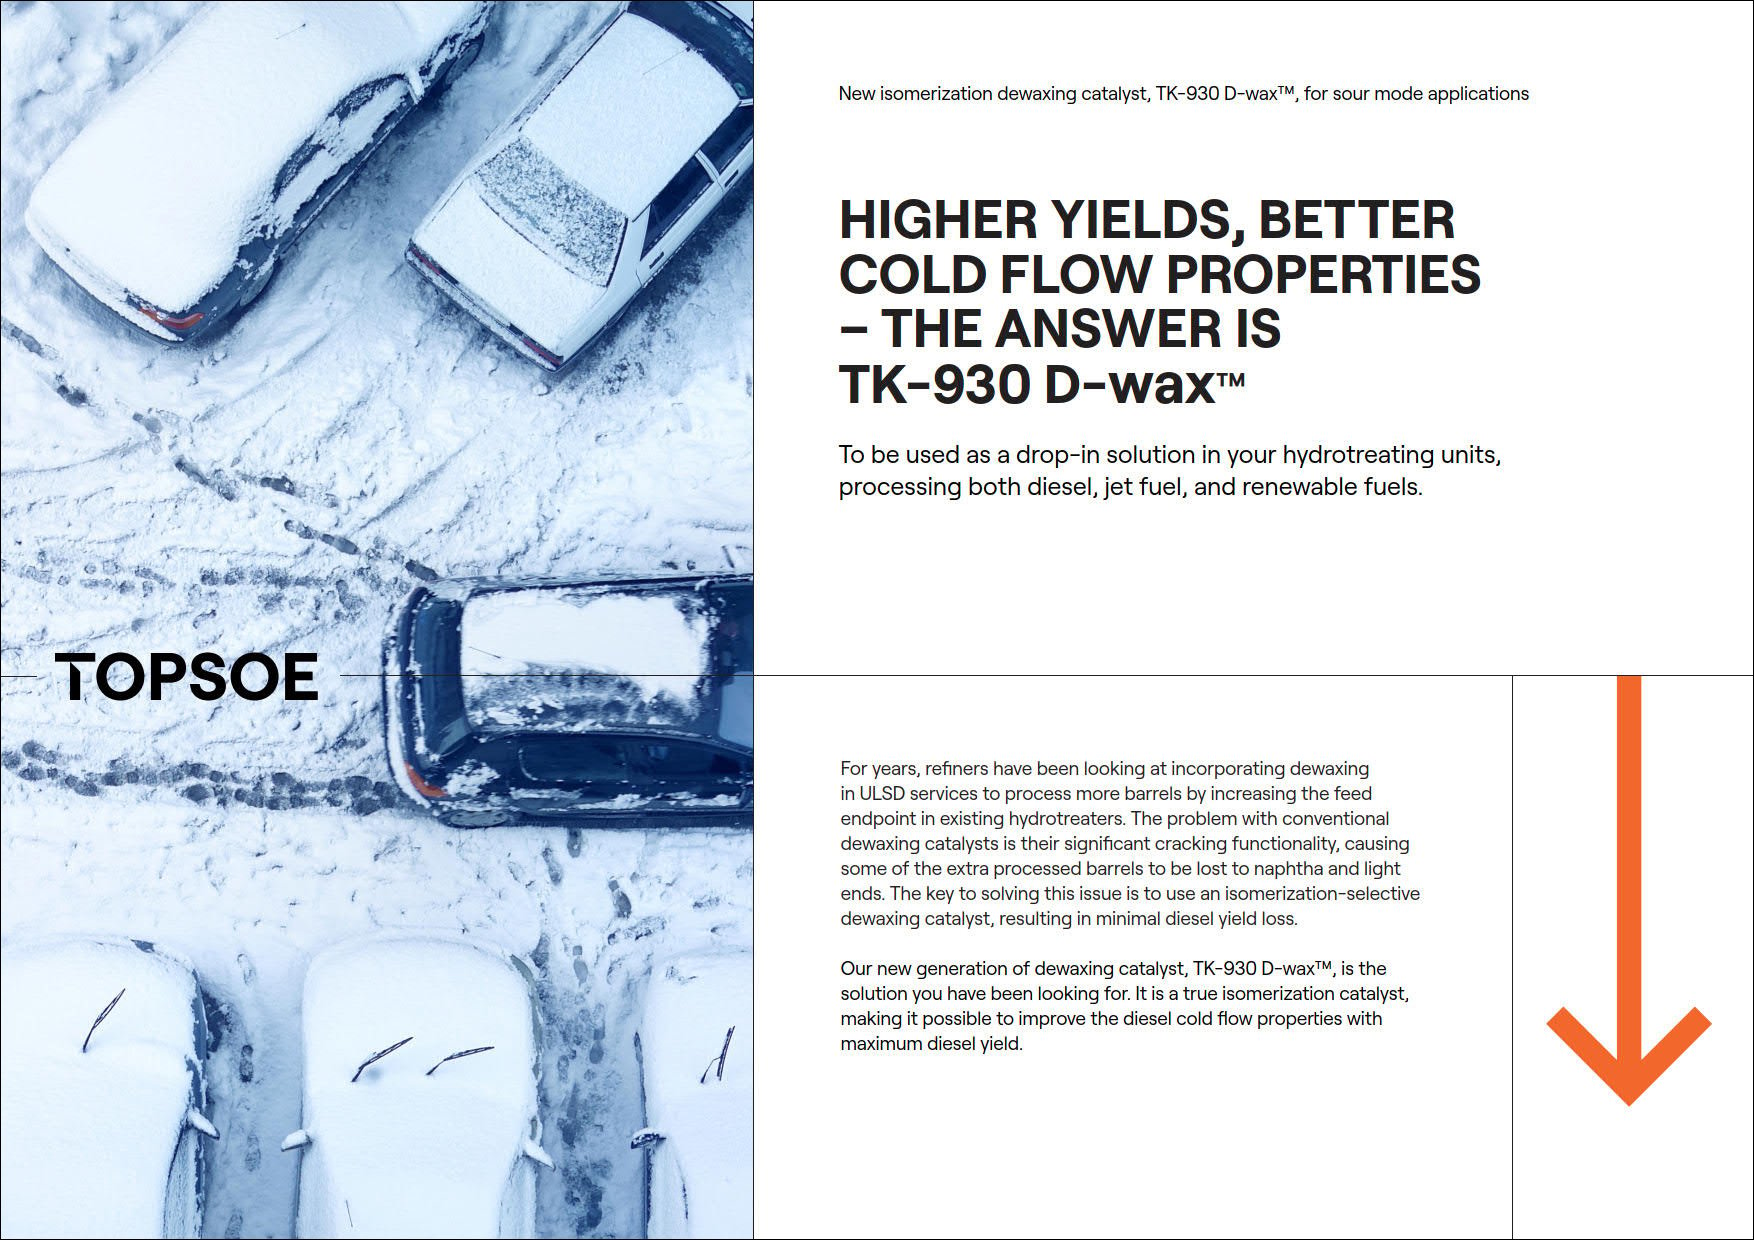 Higher yields, better cold flow properties - The answer is TK-930 D-Wax™